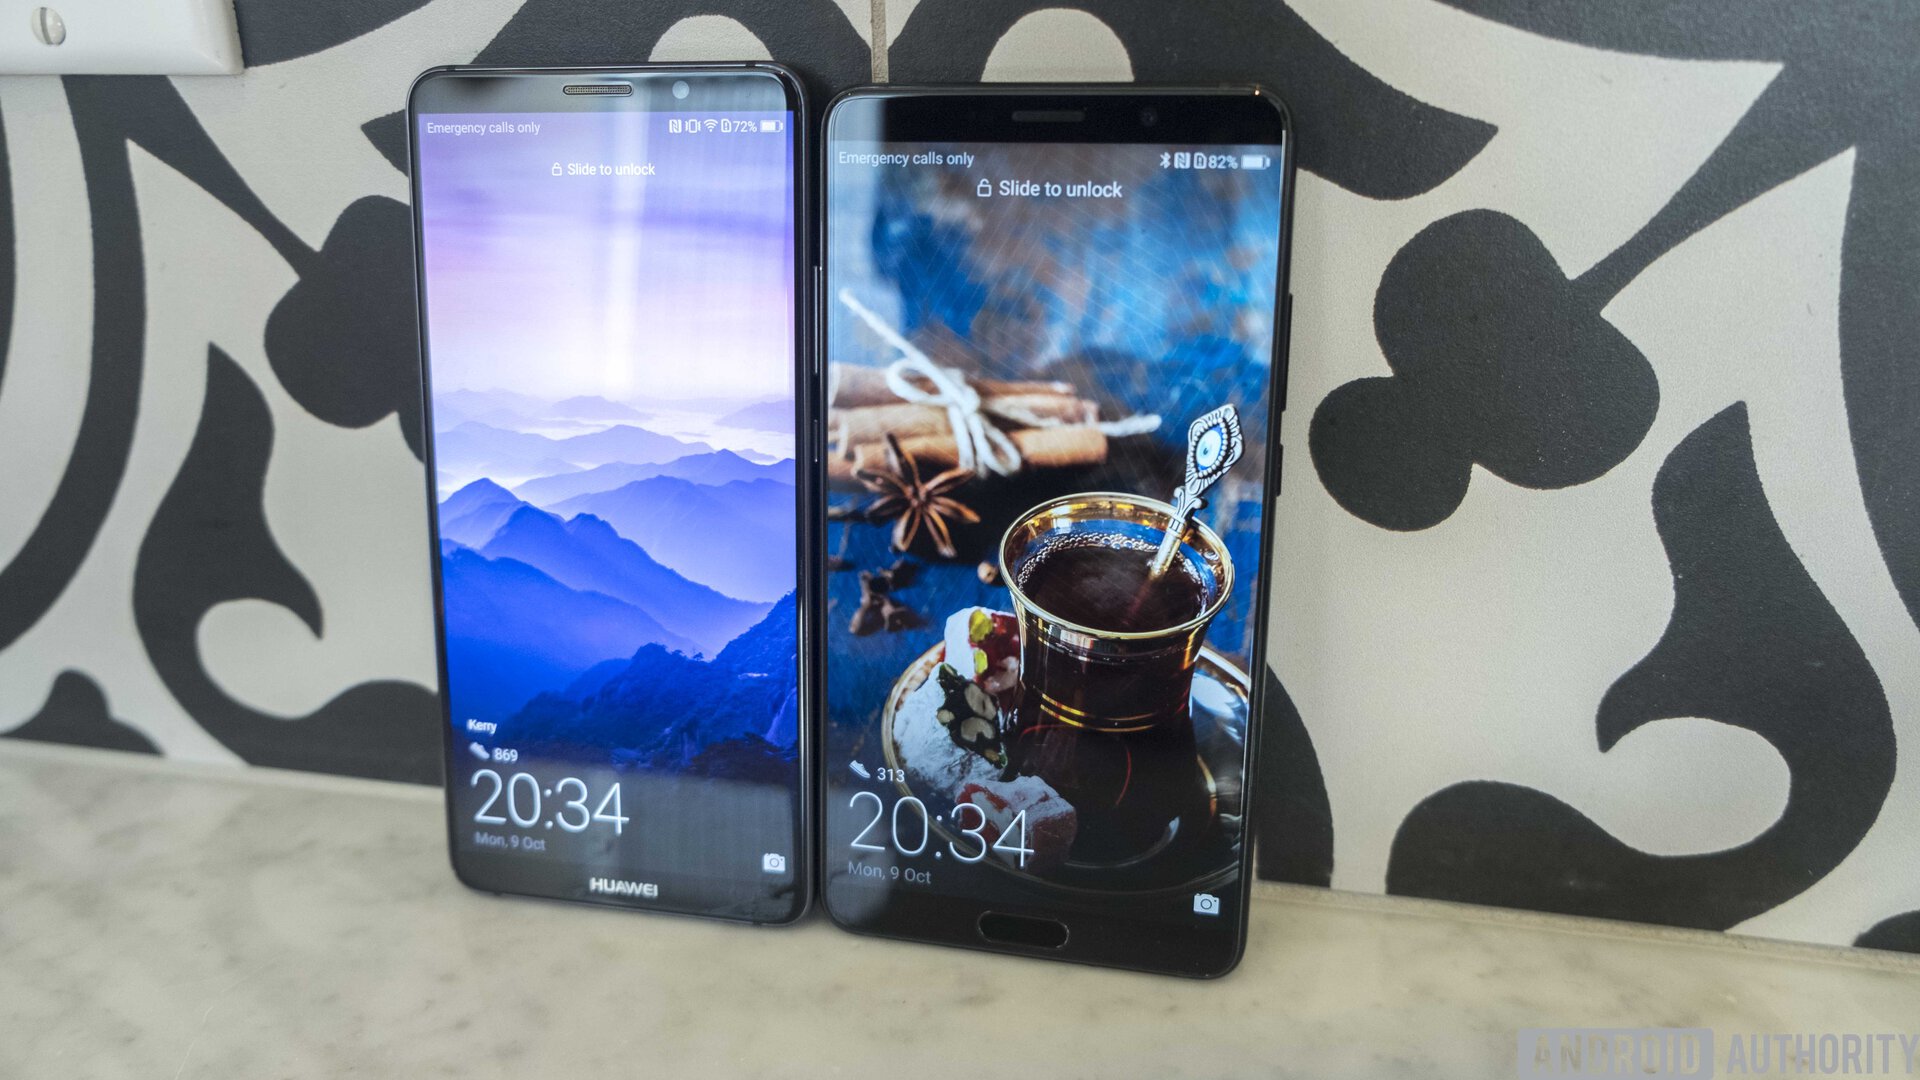 Veilig openbaring Exclusief HUAWEI Mate 10 Pro hands on - Android Authority